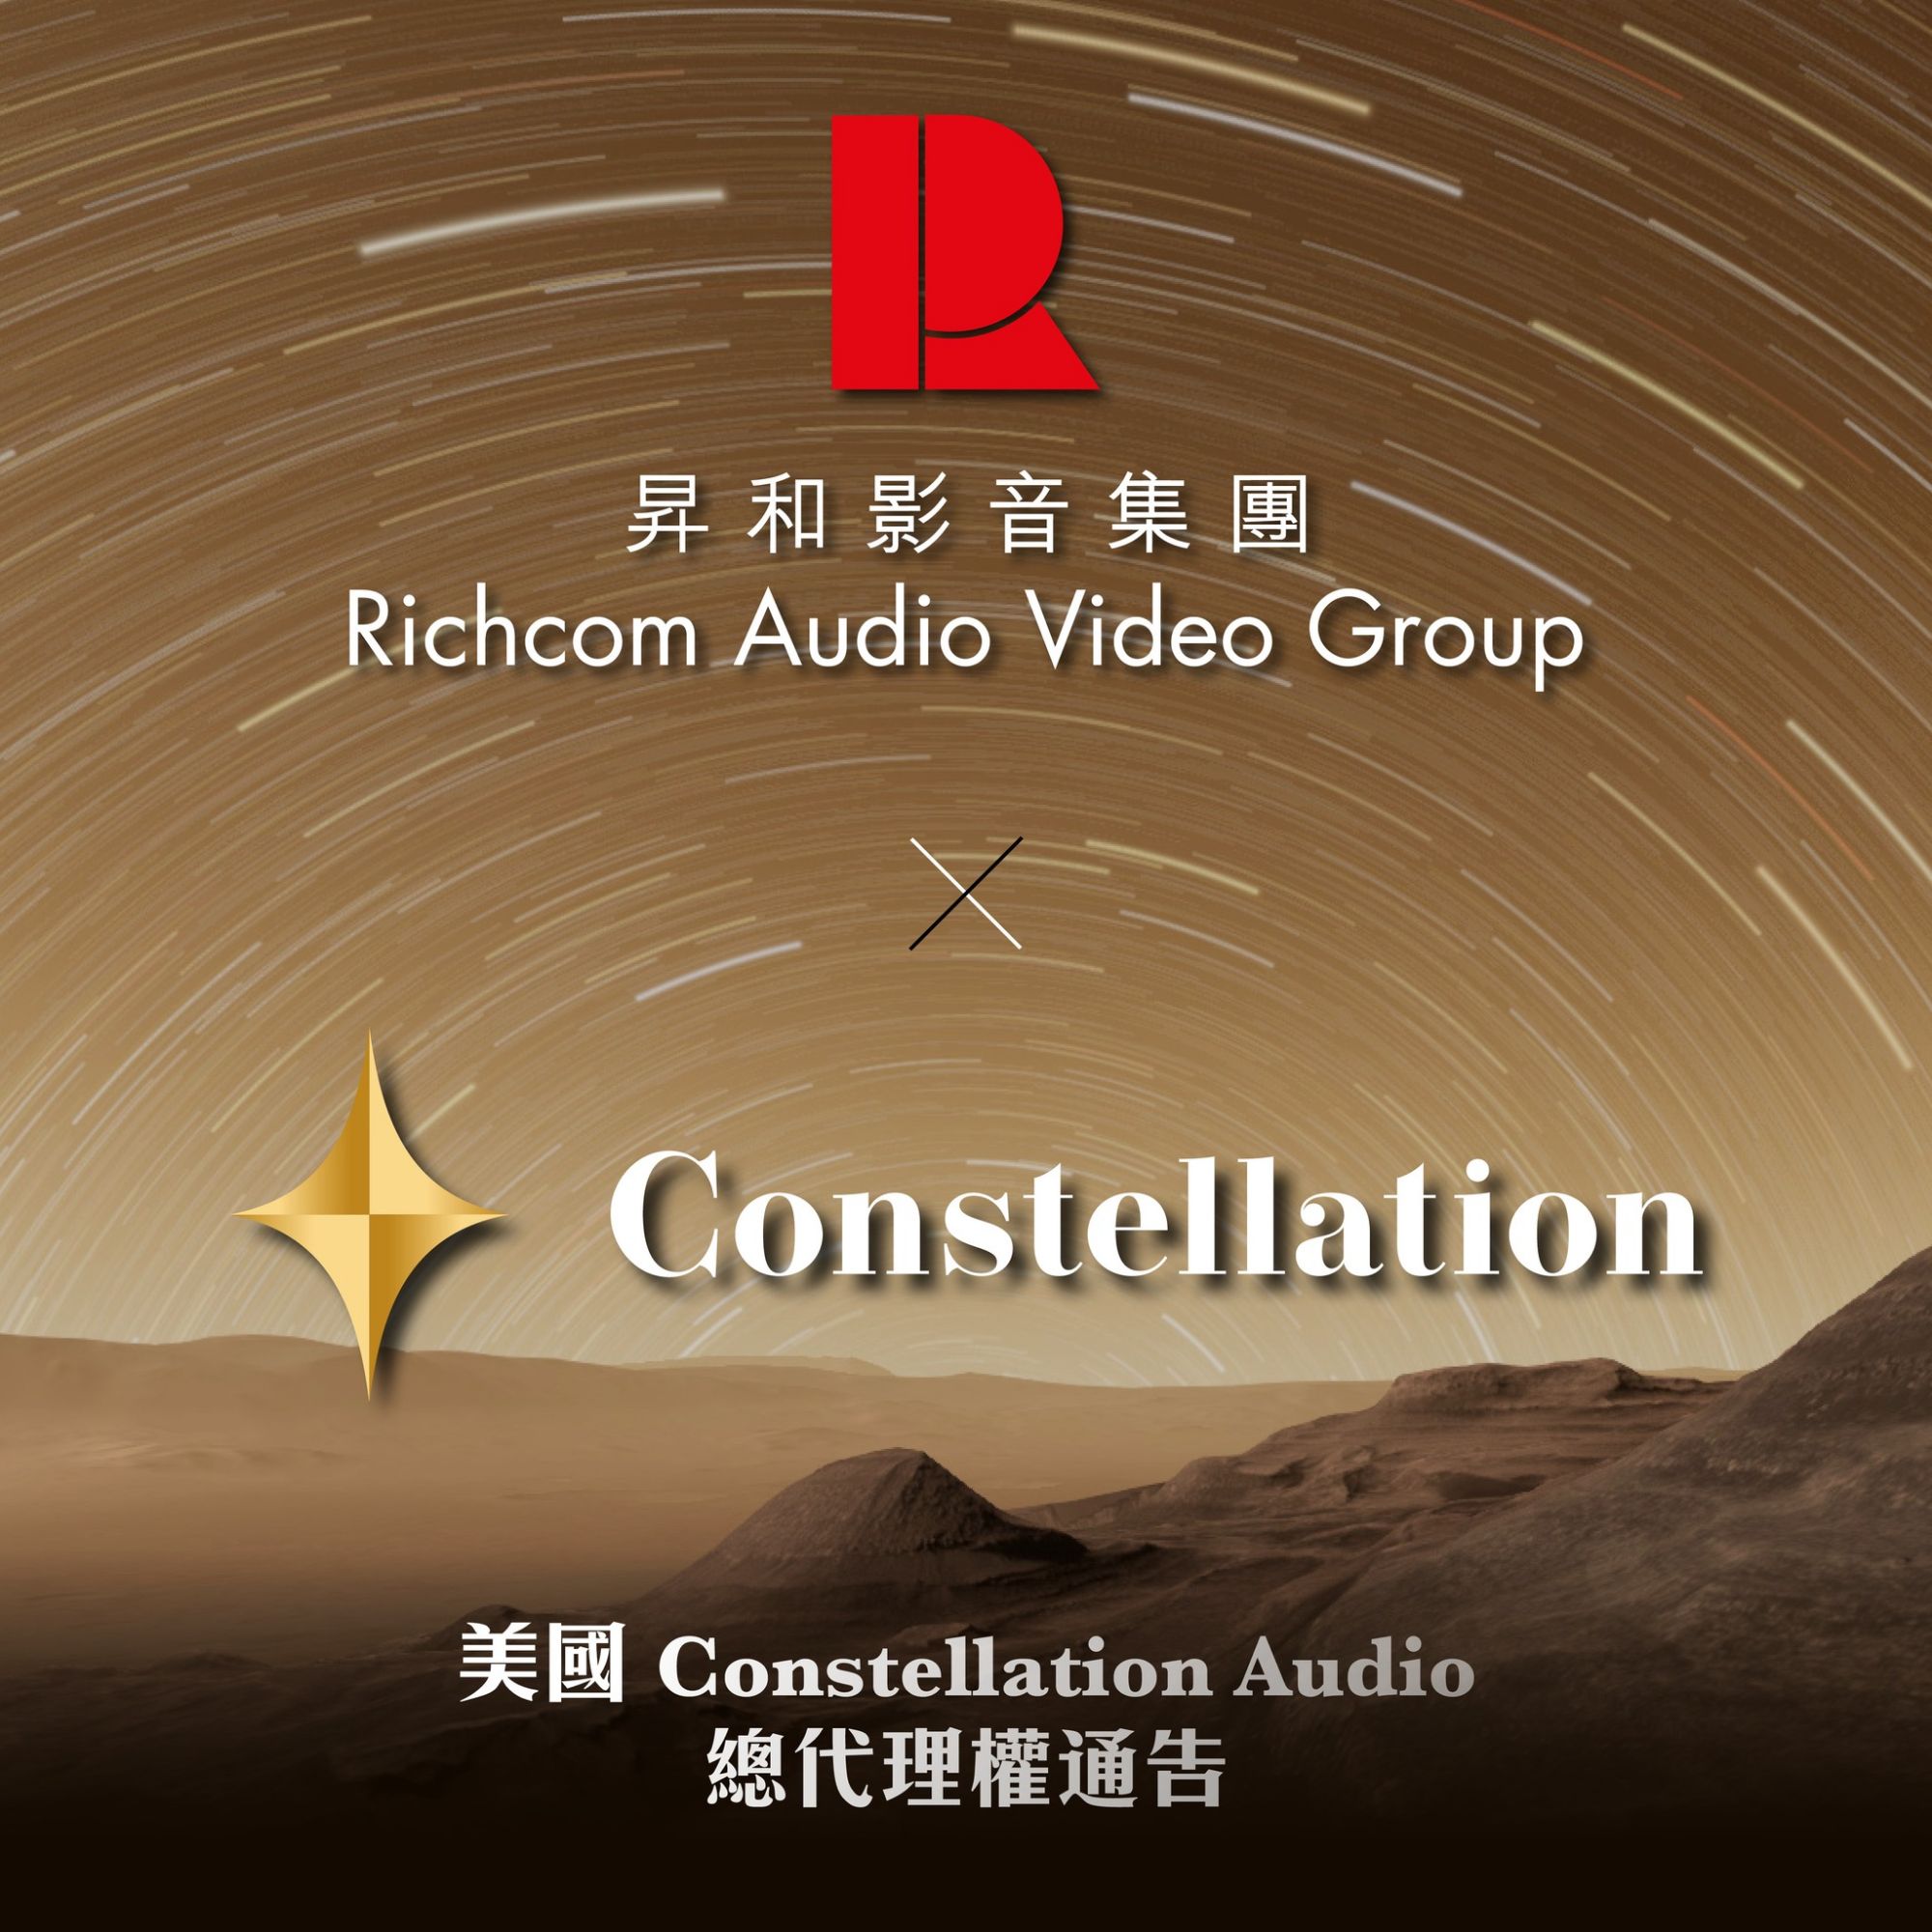 Richcom Audio Video Group has officially been granted the exclusive distribution rights for Constellation Audio in the Greater China region (including Hong Kong and Macau)